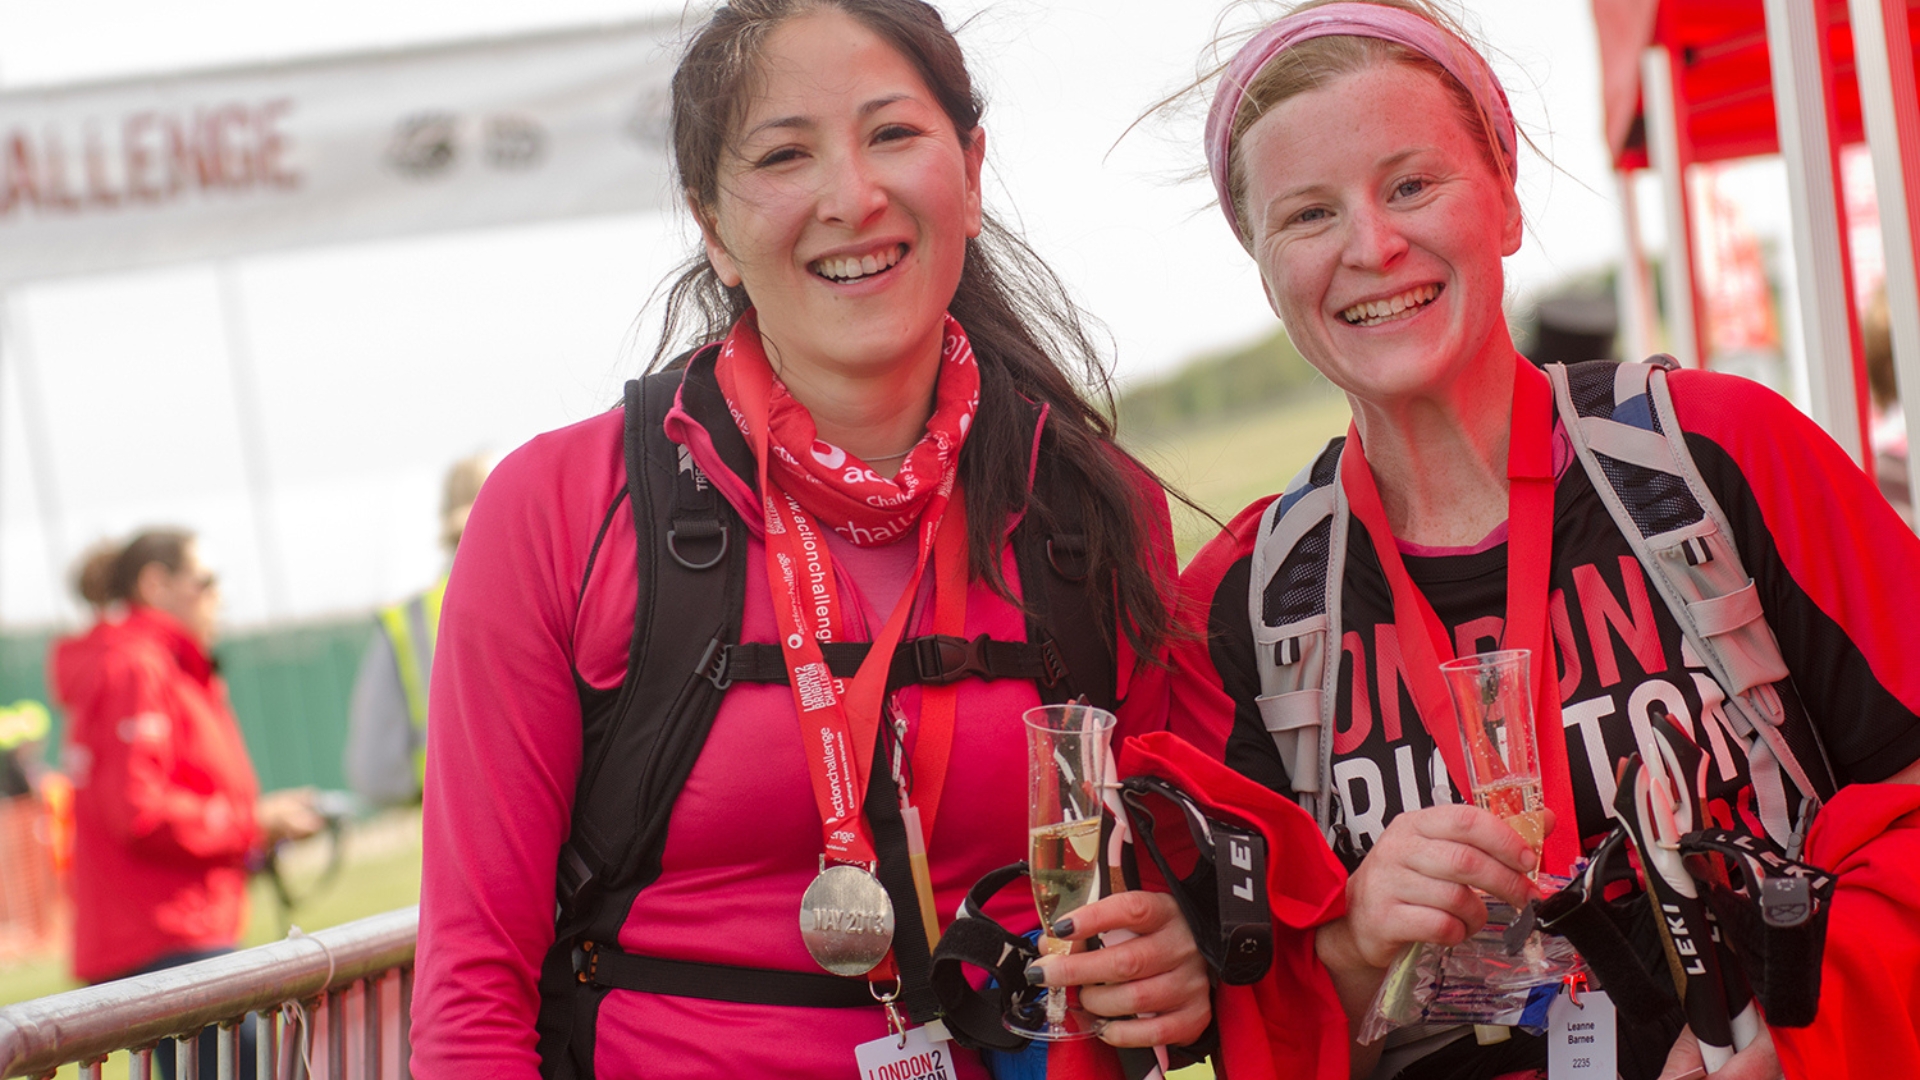 Two women who have completed the challenge and are wearing medals